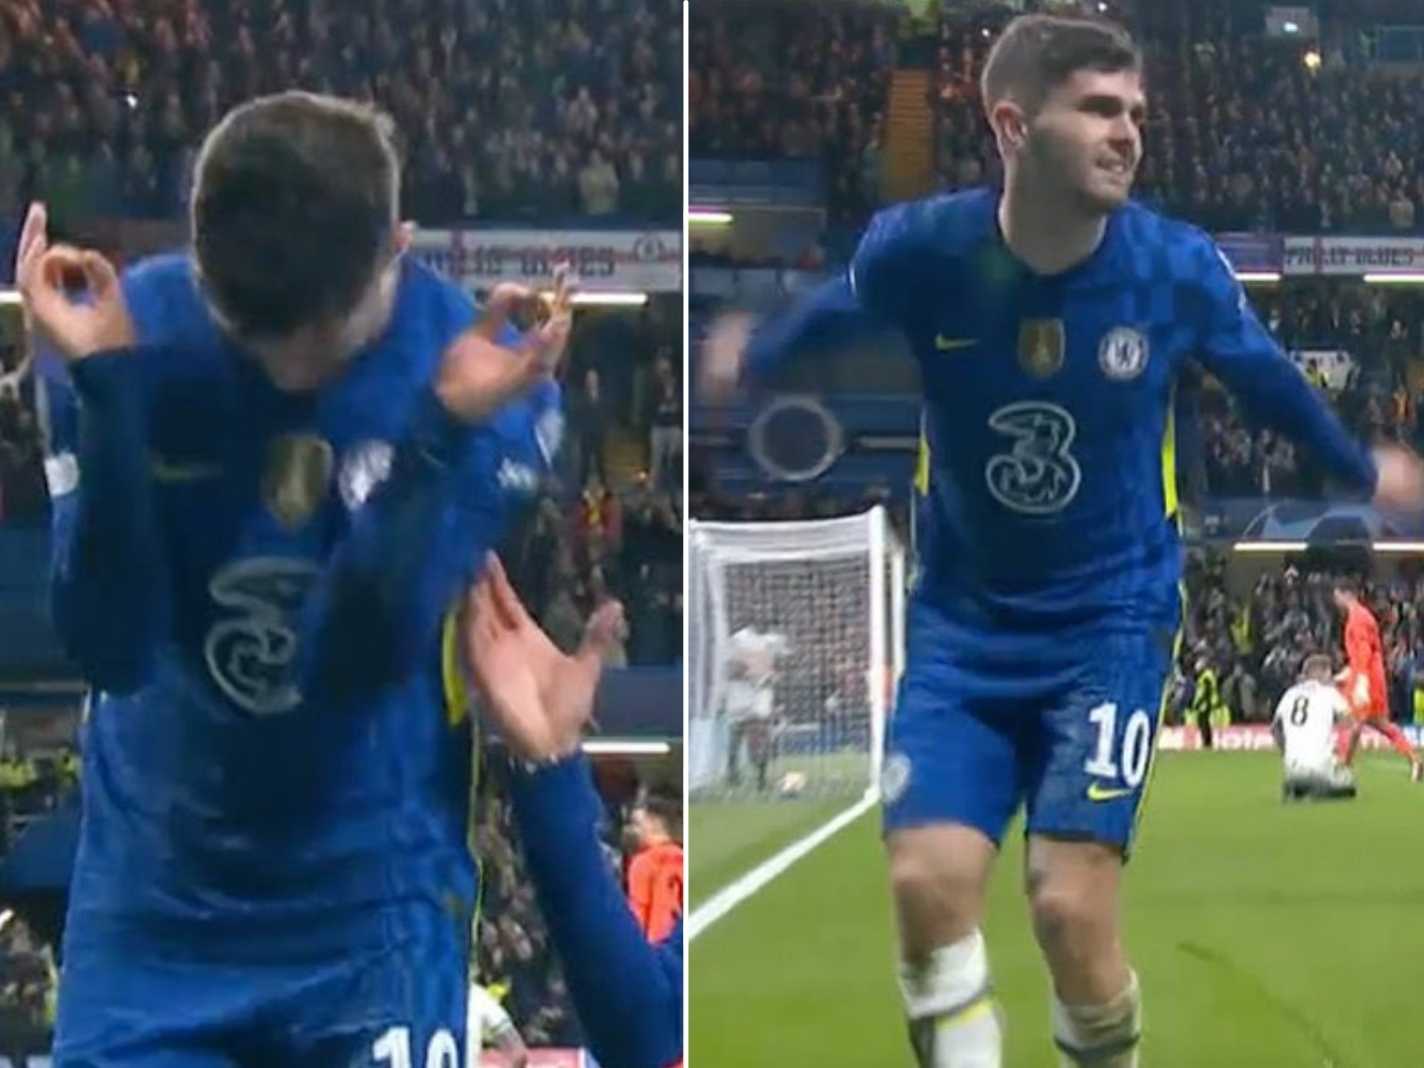 Never Griddy Again: Christian Pulisic celebrates goal in style but fans are not happy